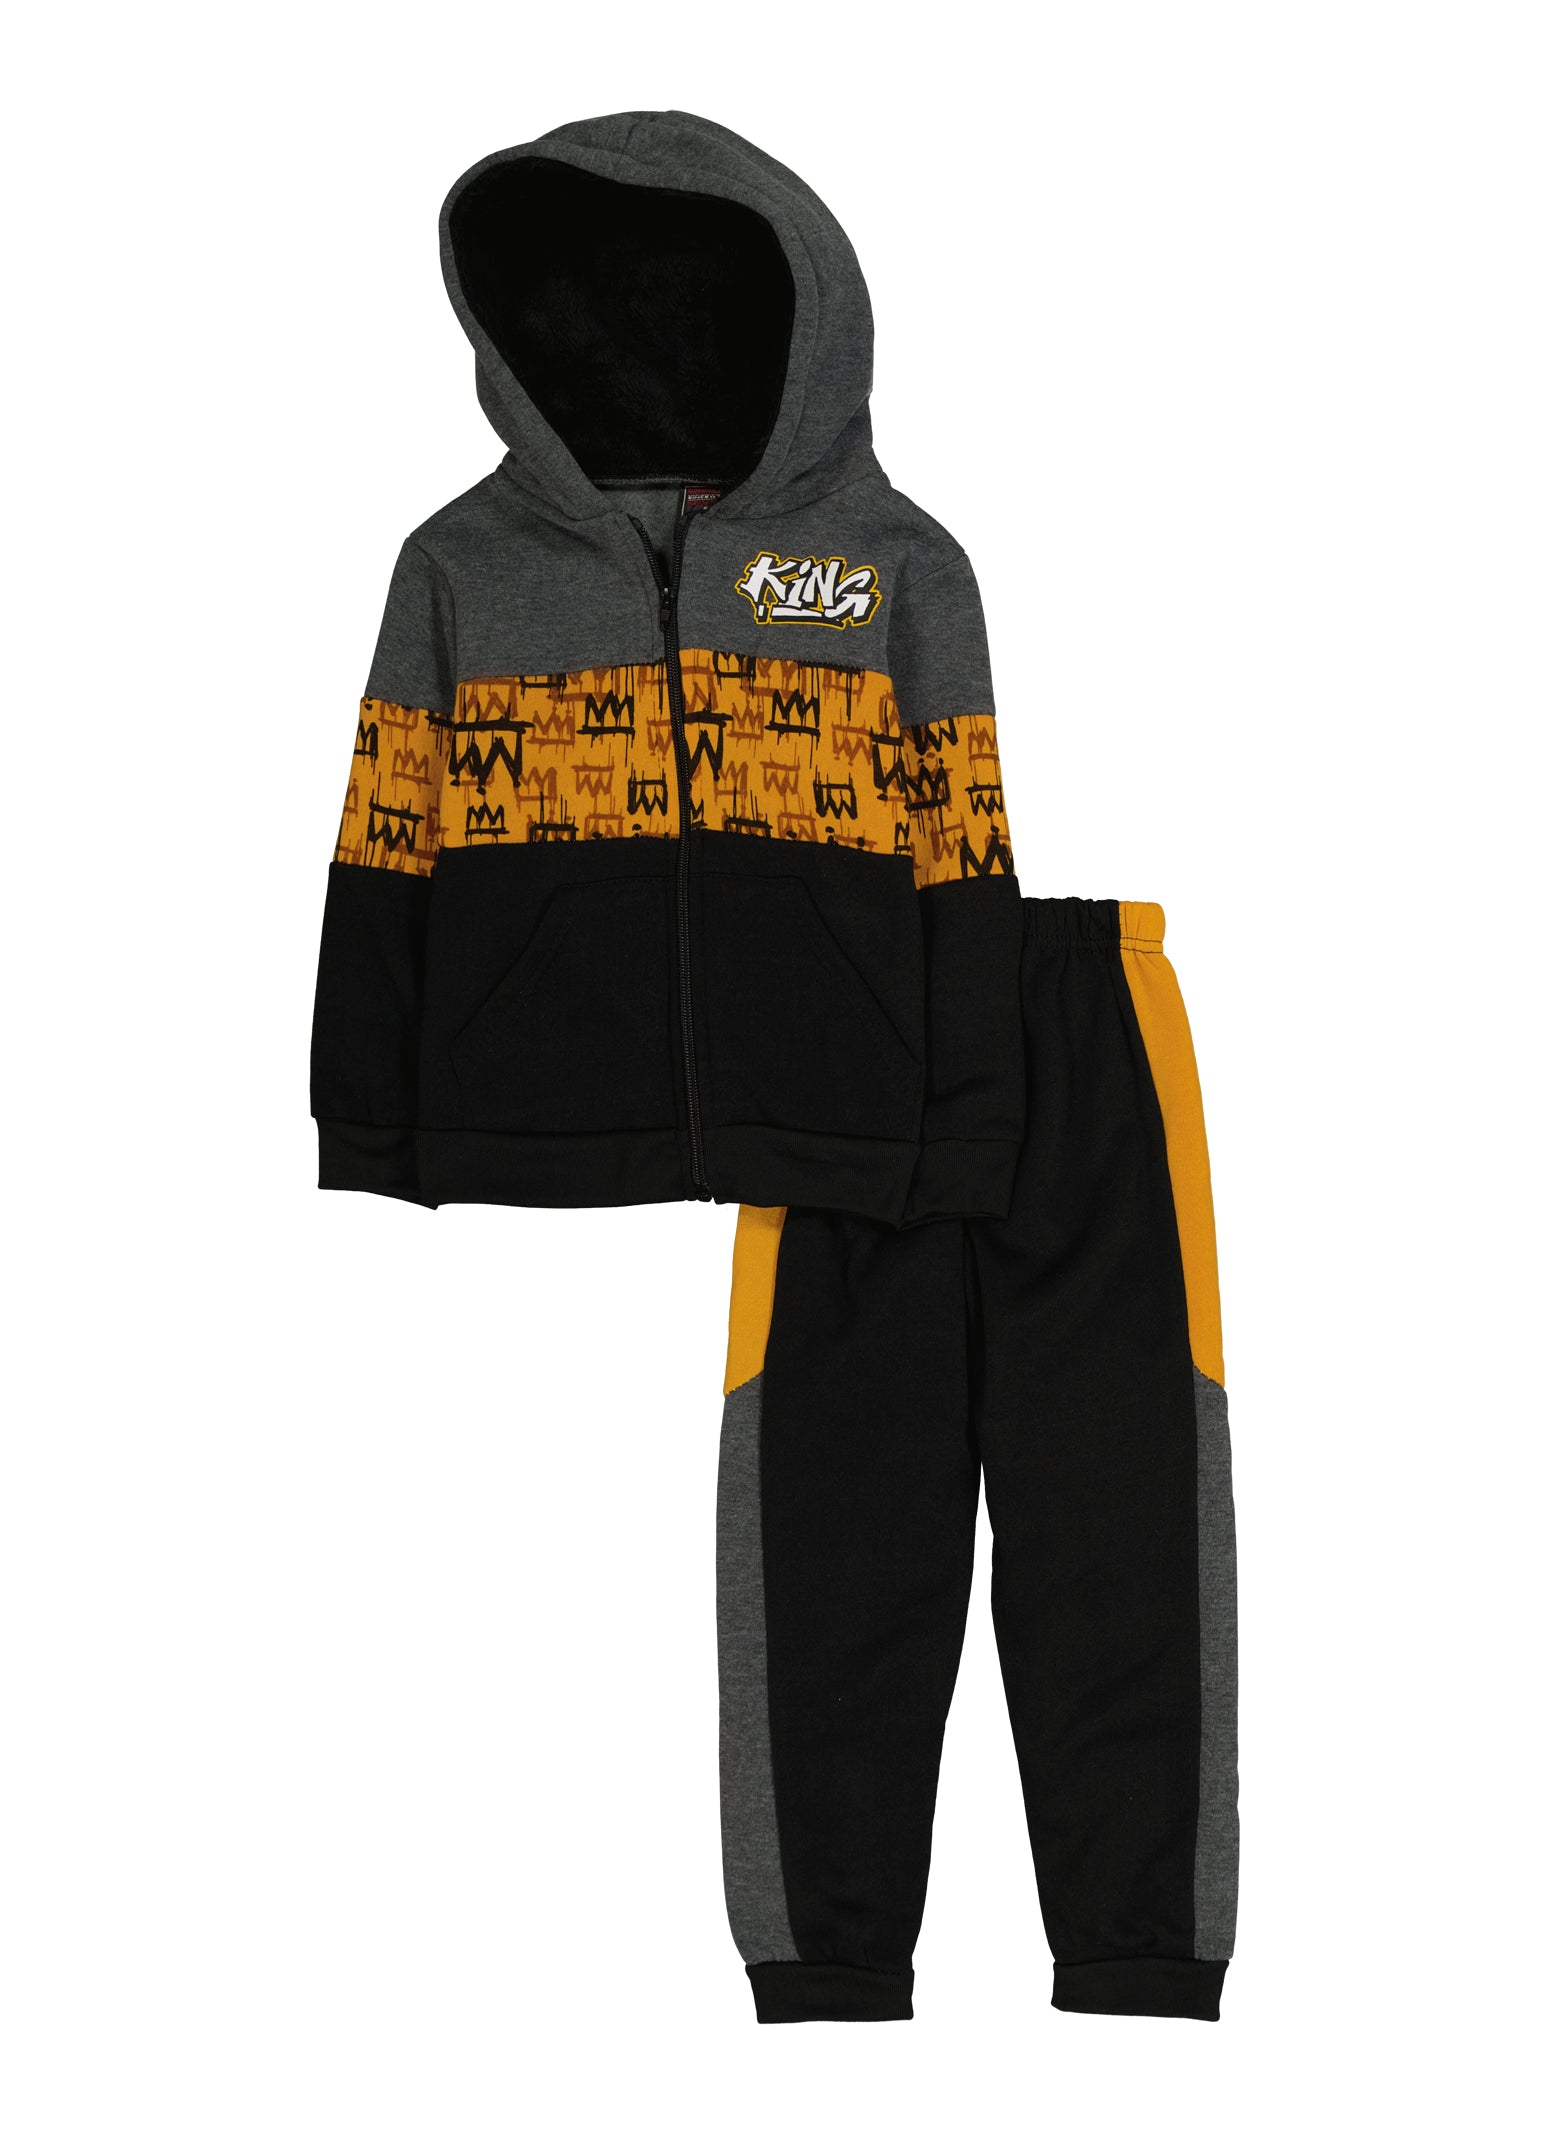 Little Boys King Graphic Zip Front Hoodie and Joggers, Multi, Size 4